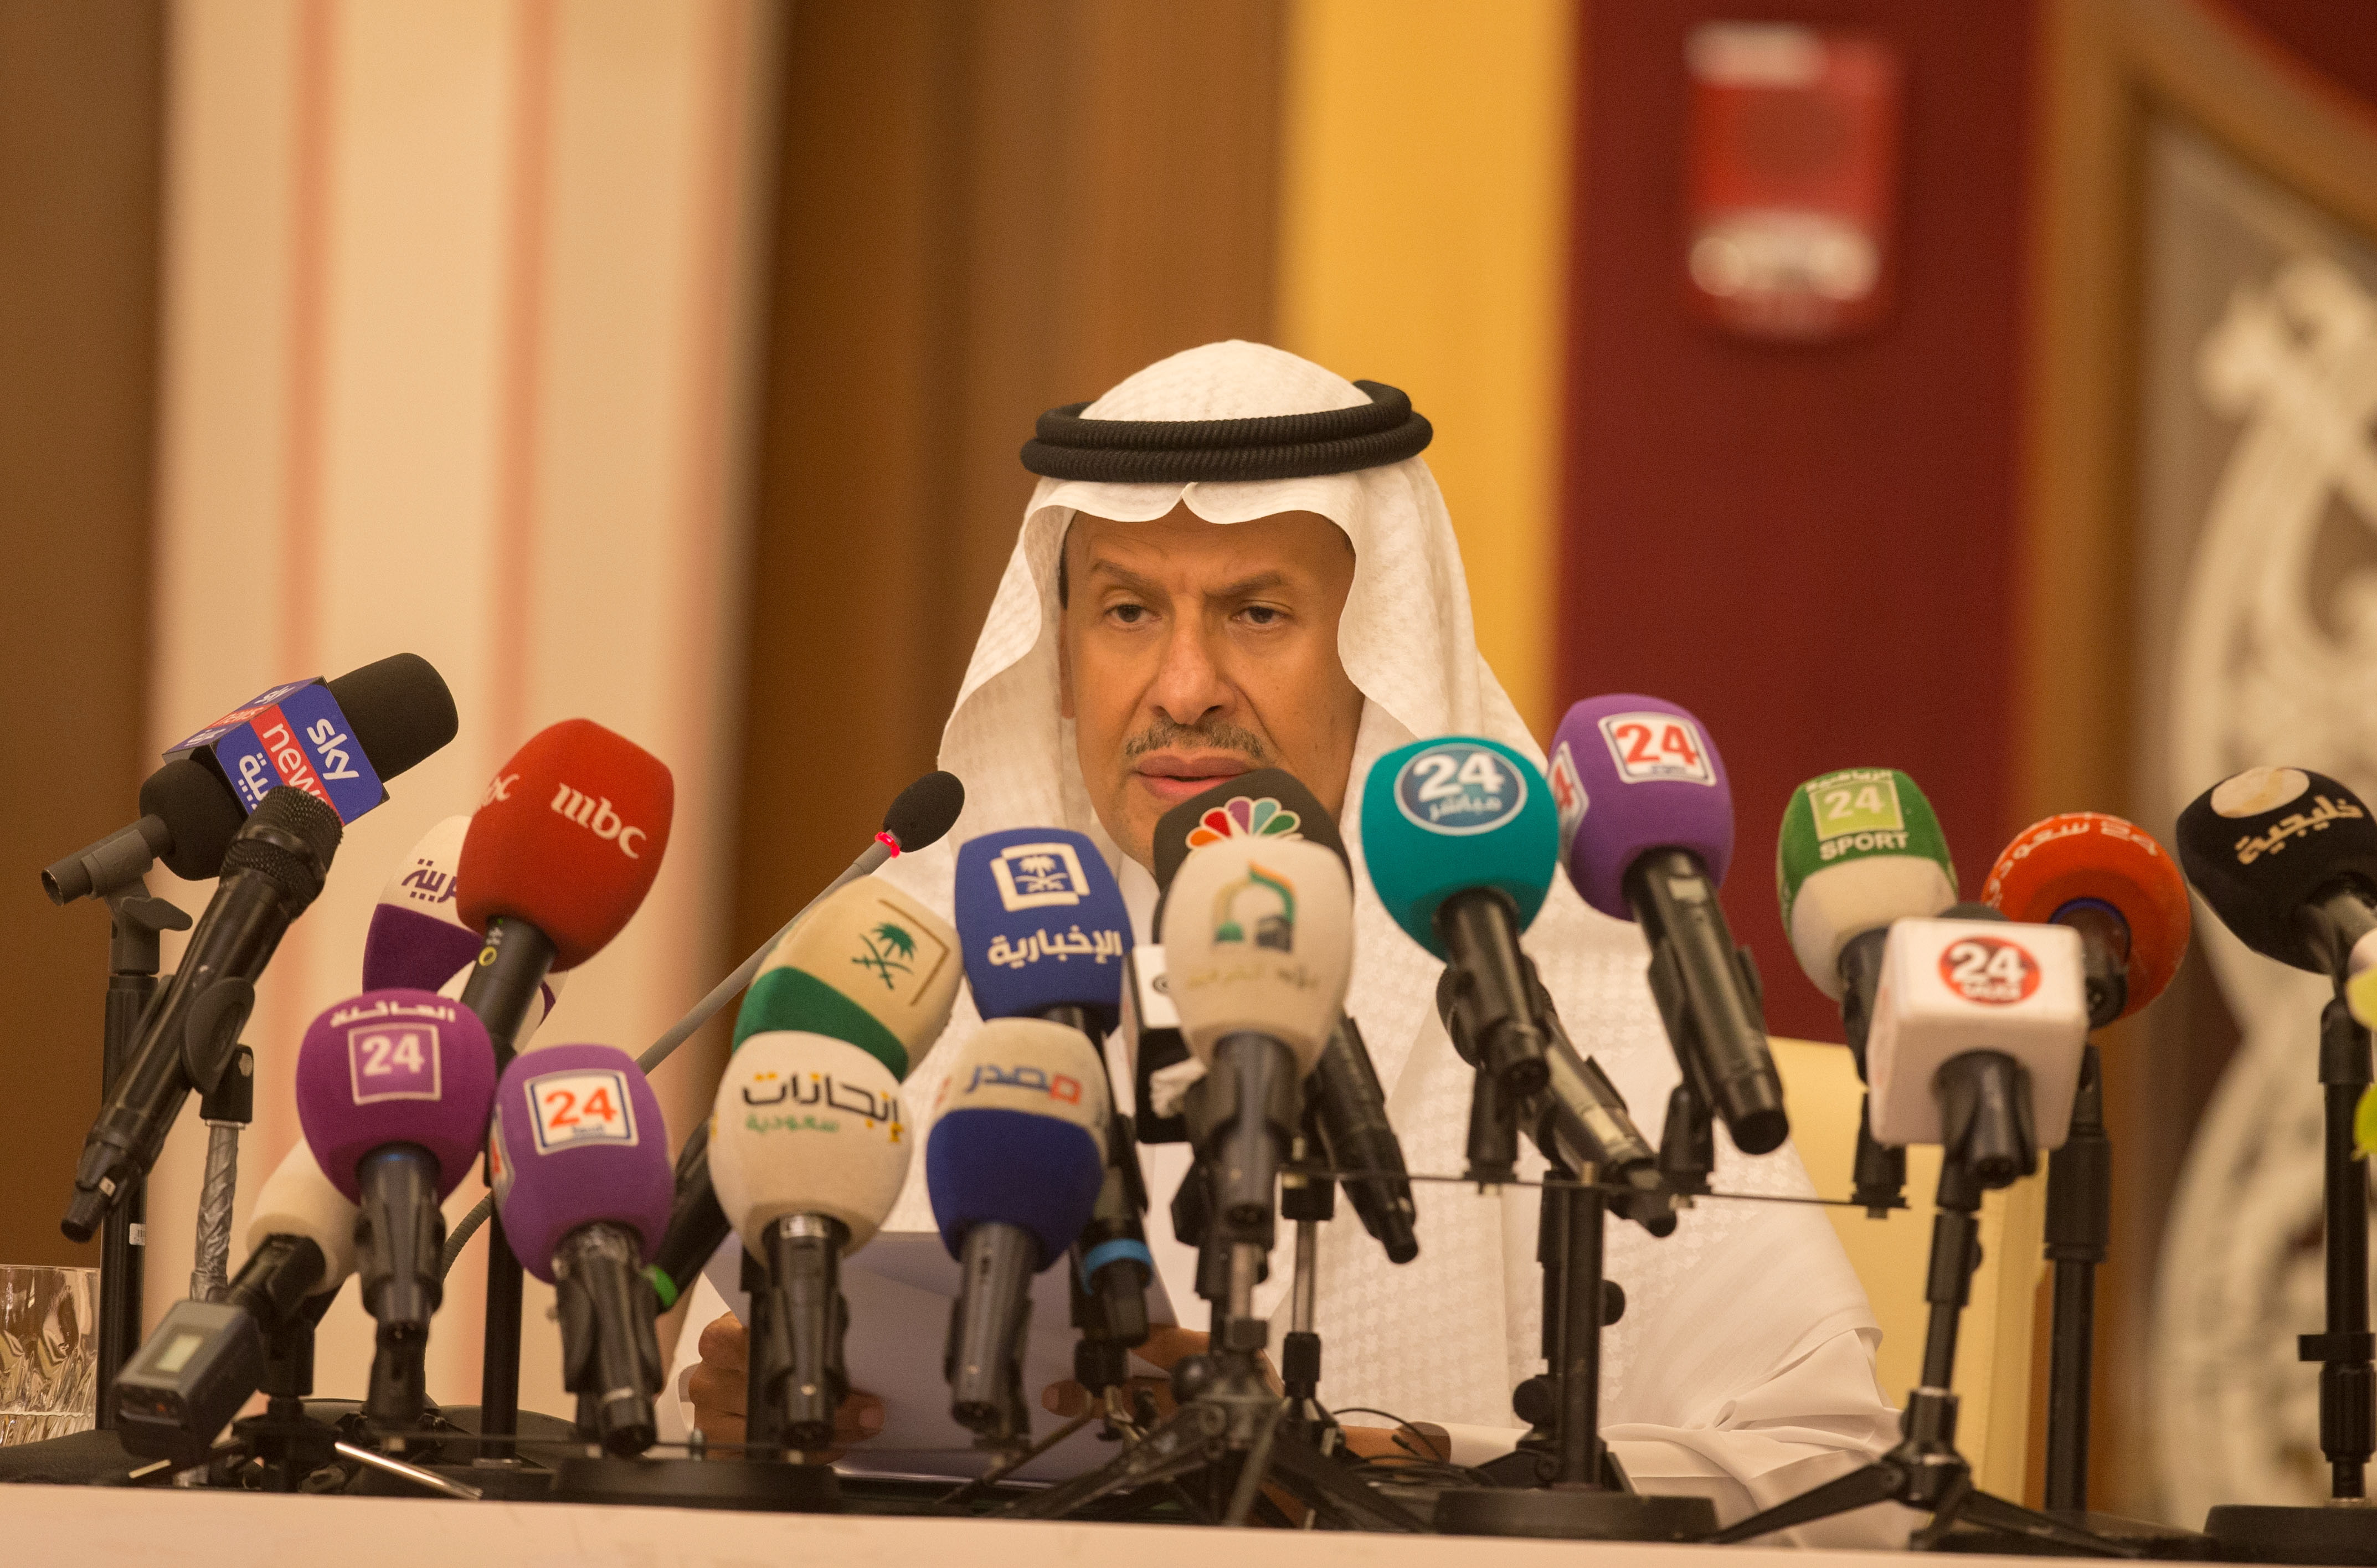 epa07849289 Prince Abdulaziz bin Salman, the Saudi Minister of Energy, gives a press conference in Jeddah, Saudi Arabia, 17 September 2019. Prince Abdulaziz bin Salman said that his country's oil production will be fully restored by the end of September, after the drone attack that knocked out almost half of the country's production.  EPA/STR